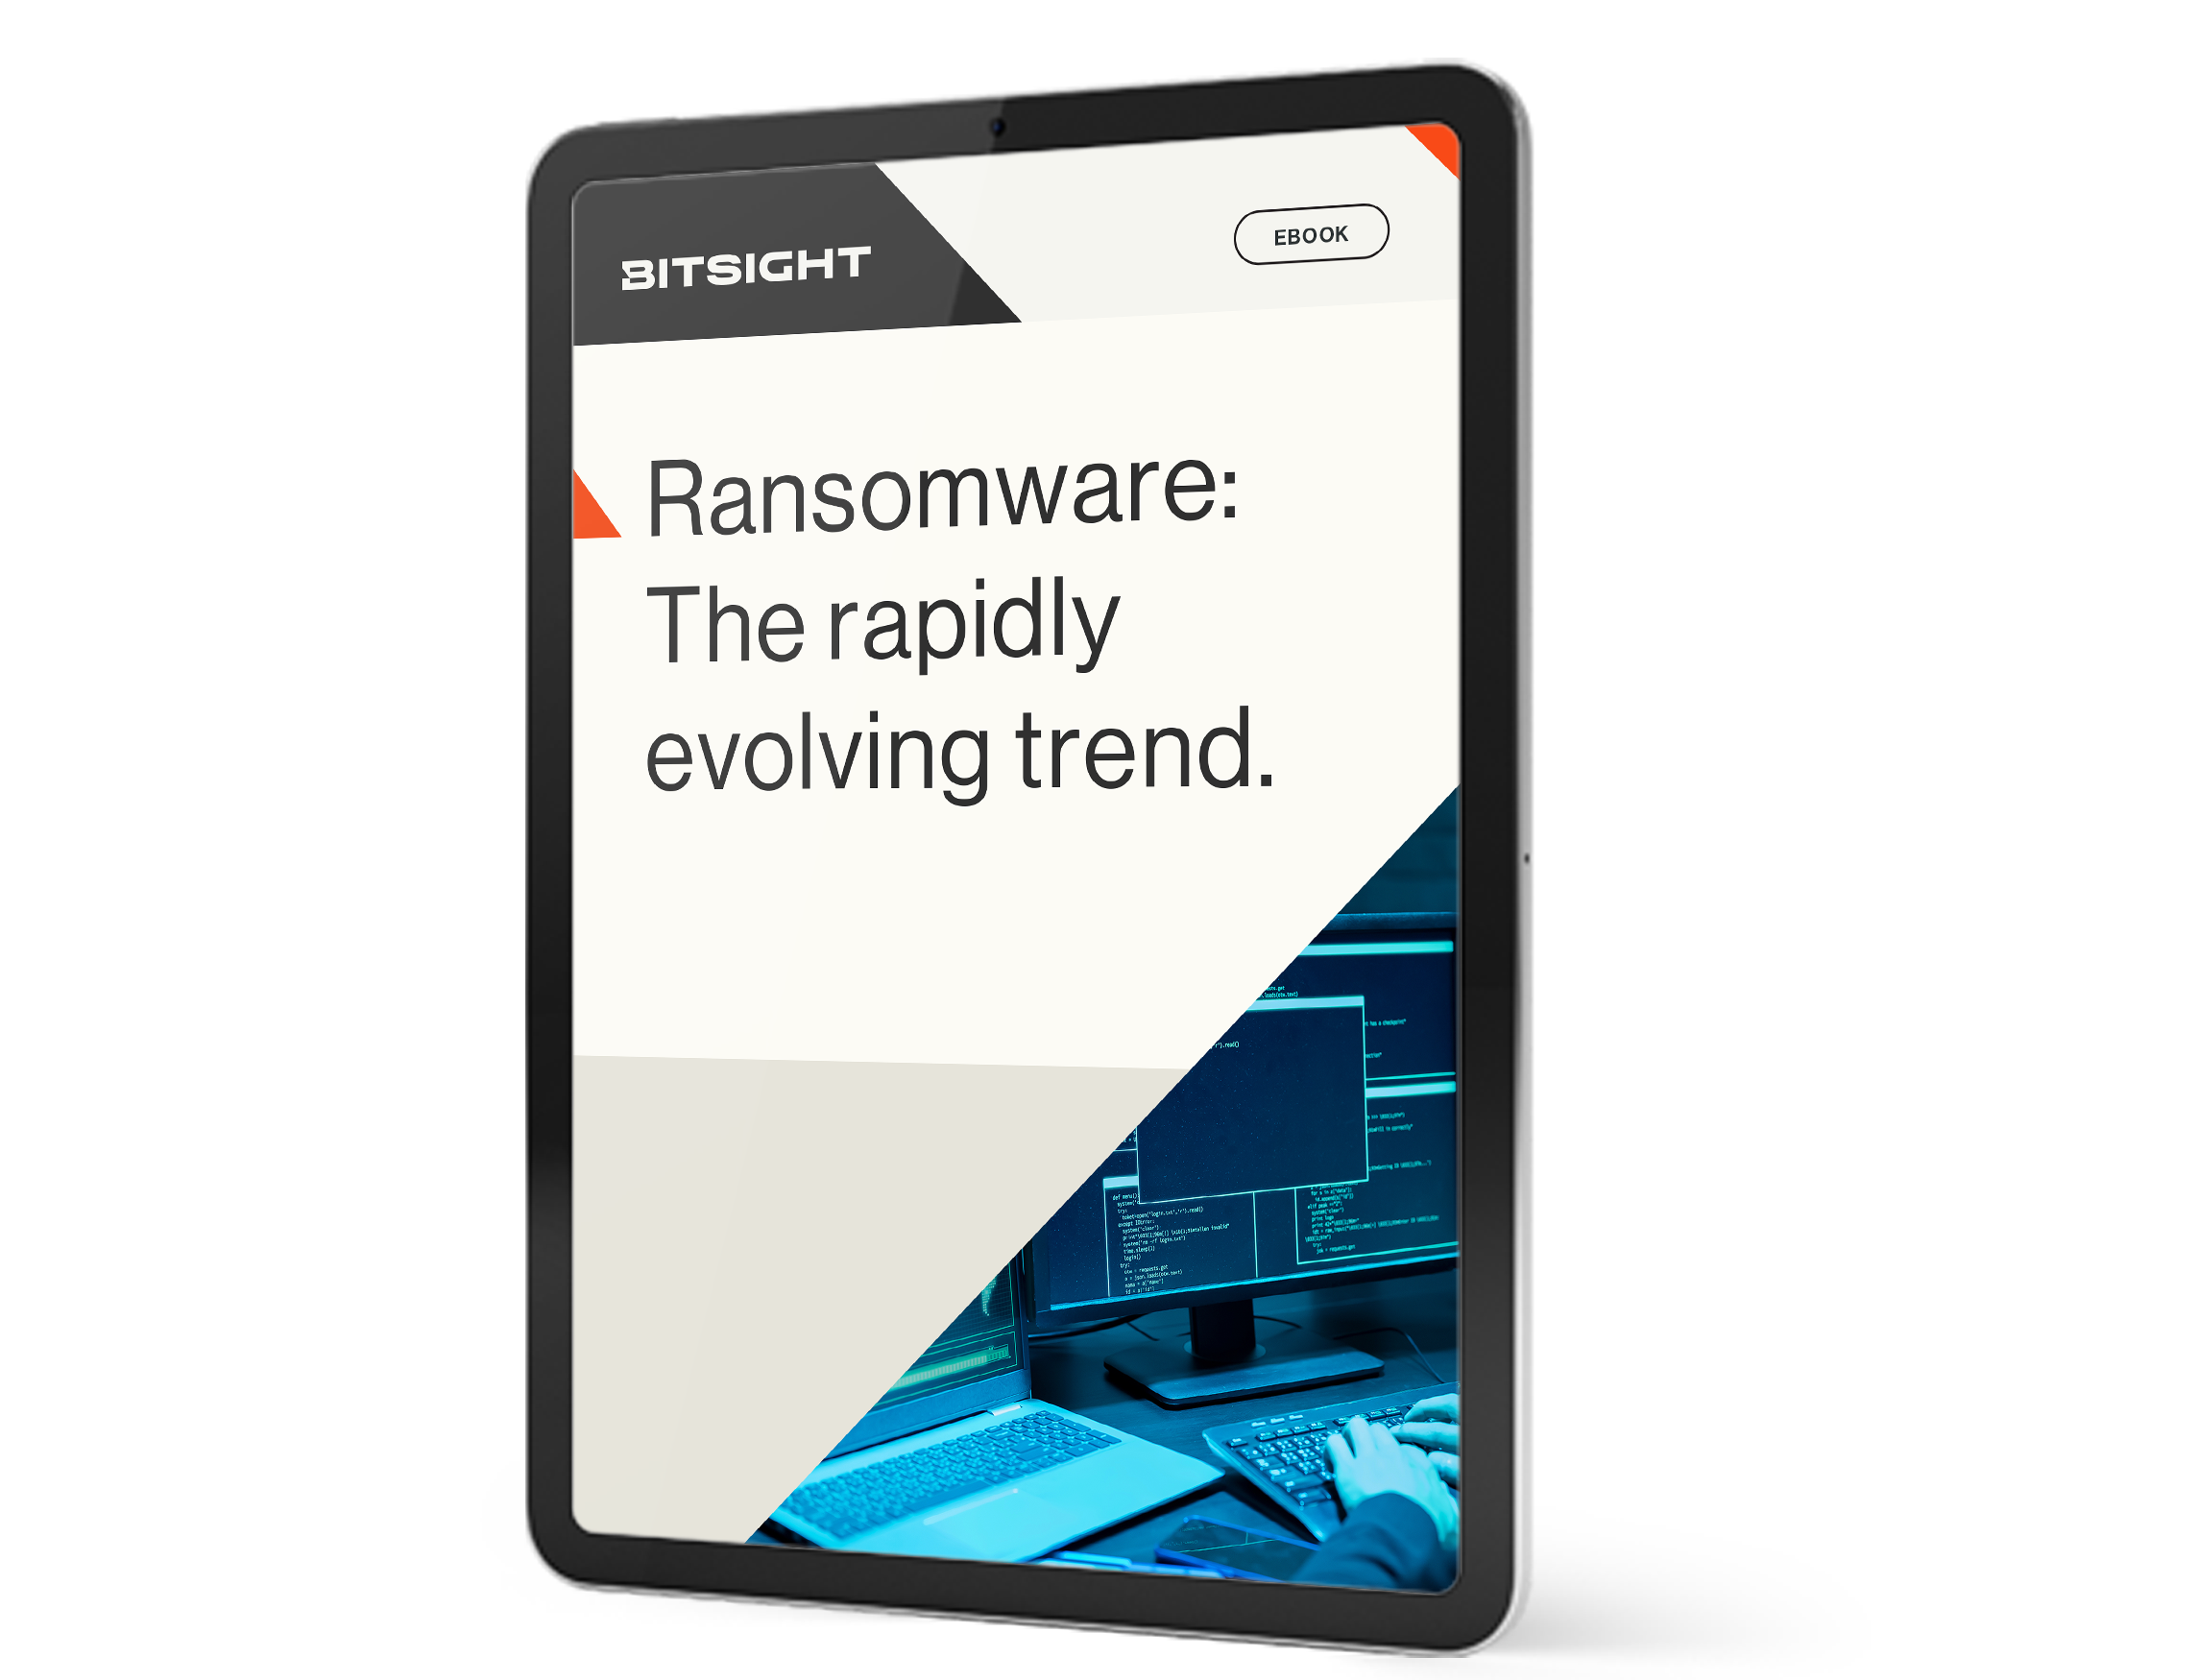 Ransomware: The Rapidly Evolving Trend